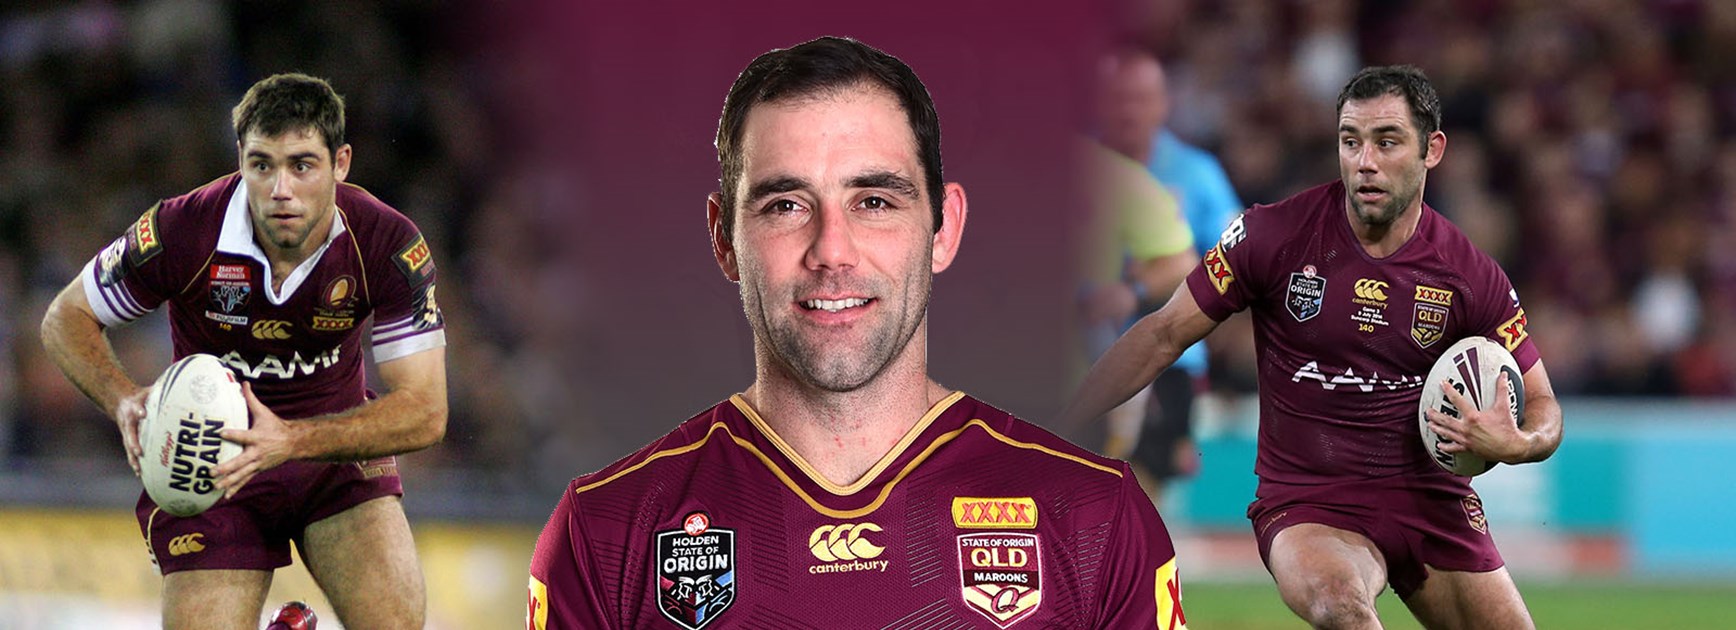 Cam Smith is about to break the all-time Origin appearance record. On debut (left) and during 2015 series (right).